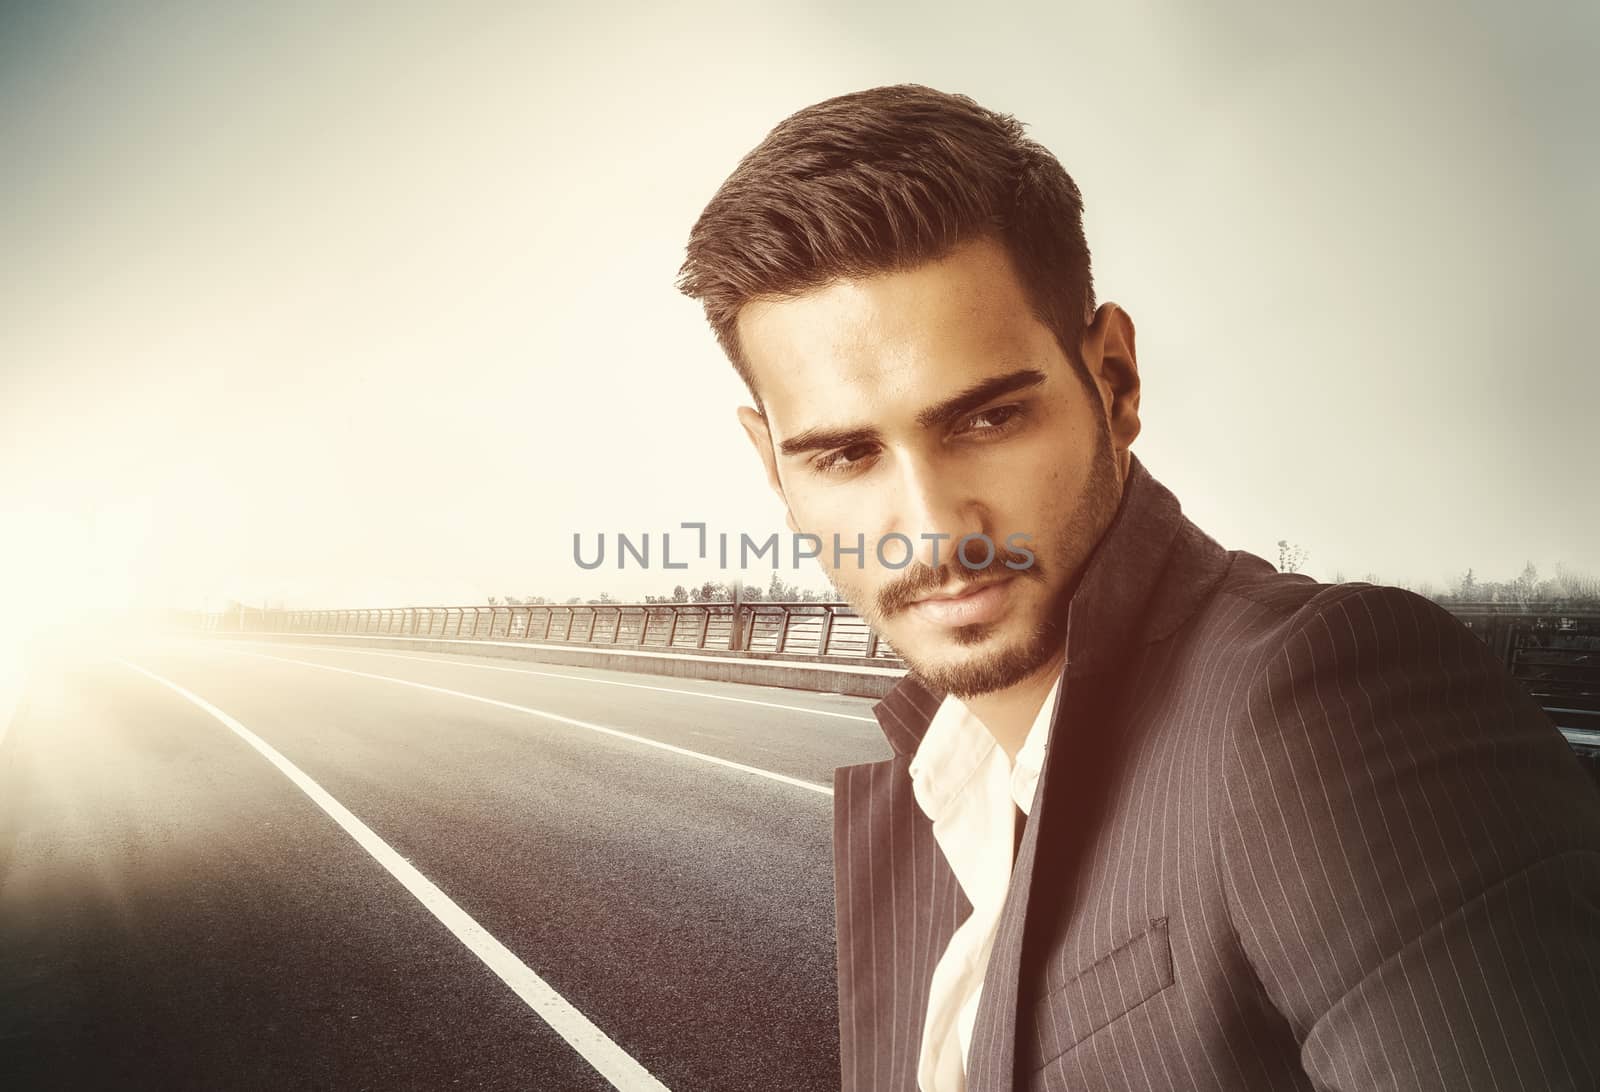 Confident stylish man standing on a roadside and looking away. Horizontal outdoors shot.